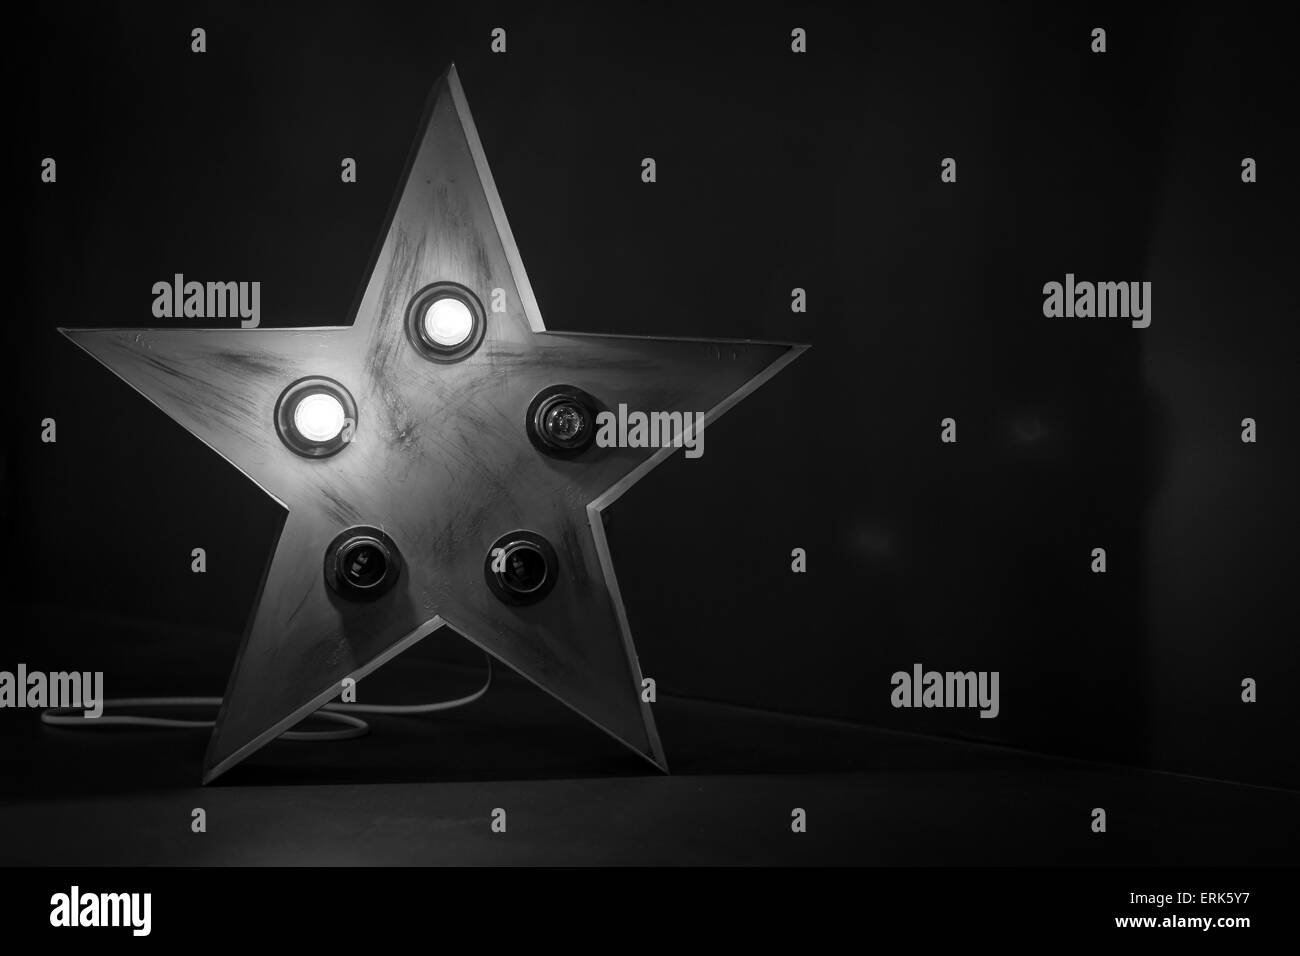 Single red soviet star lamp display with broken bulbs in black and white Stock Photo